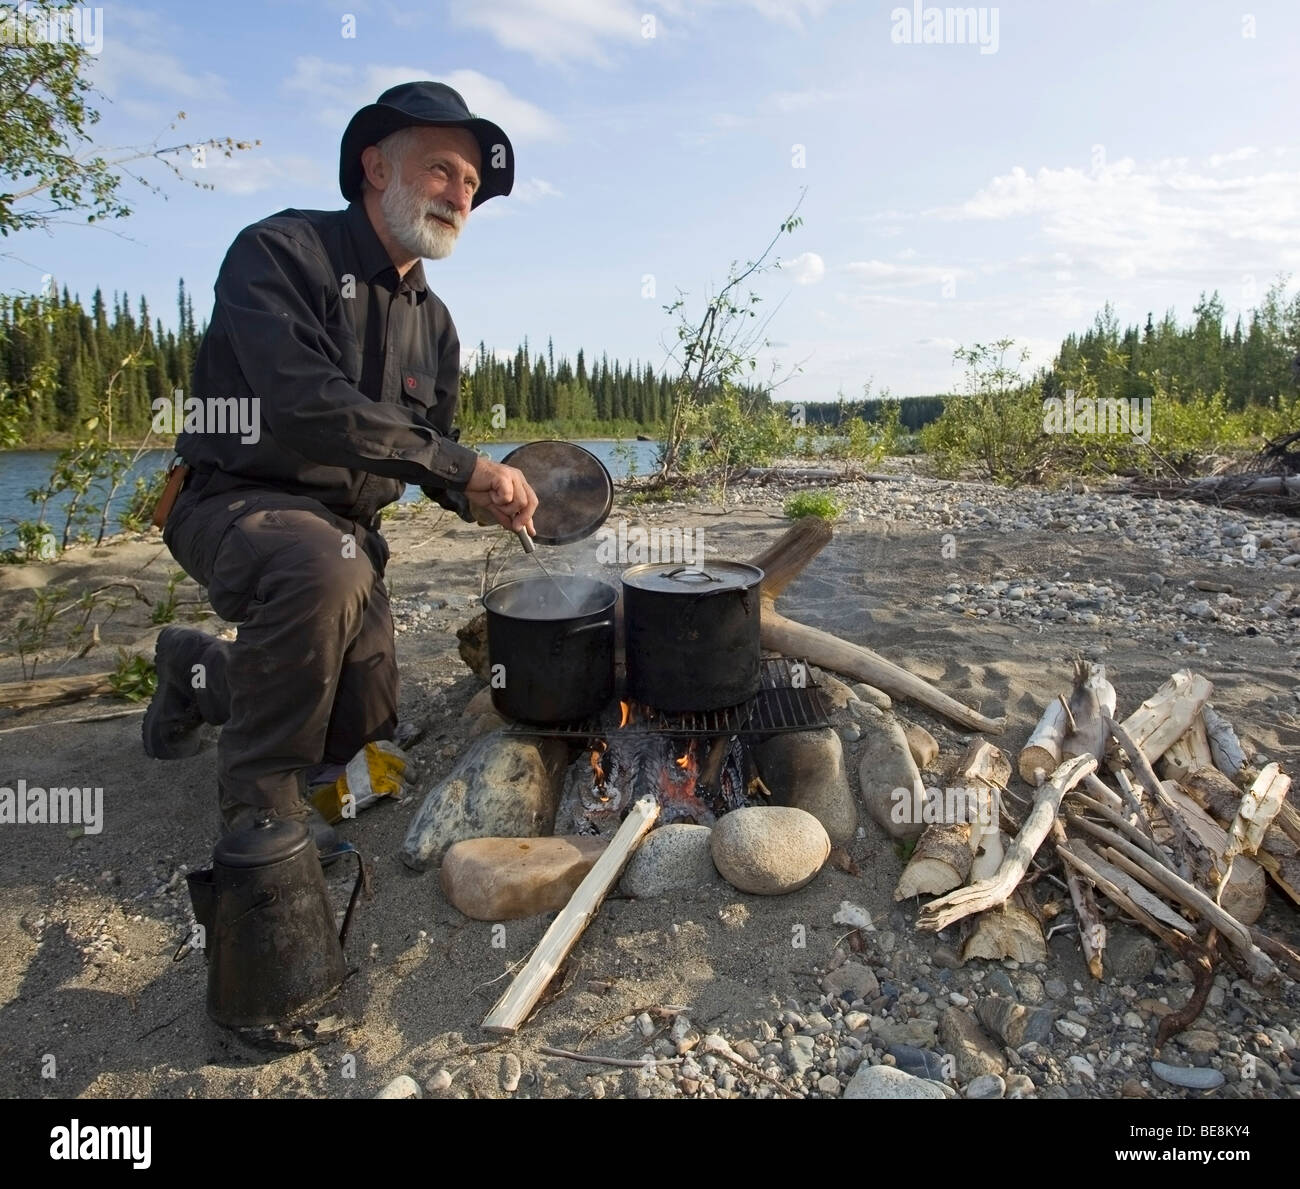 Man cooking on a camp fire, pots, kettle, upper Liard River, Yukon Territory, Canada Stock Photo